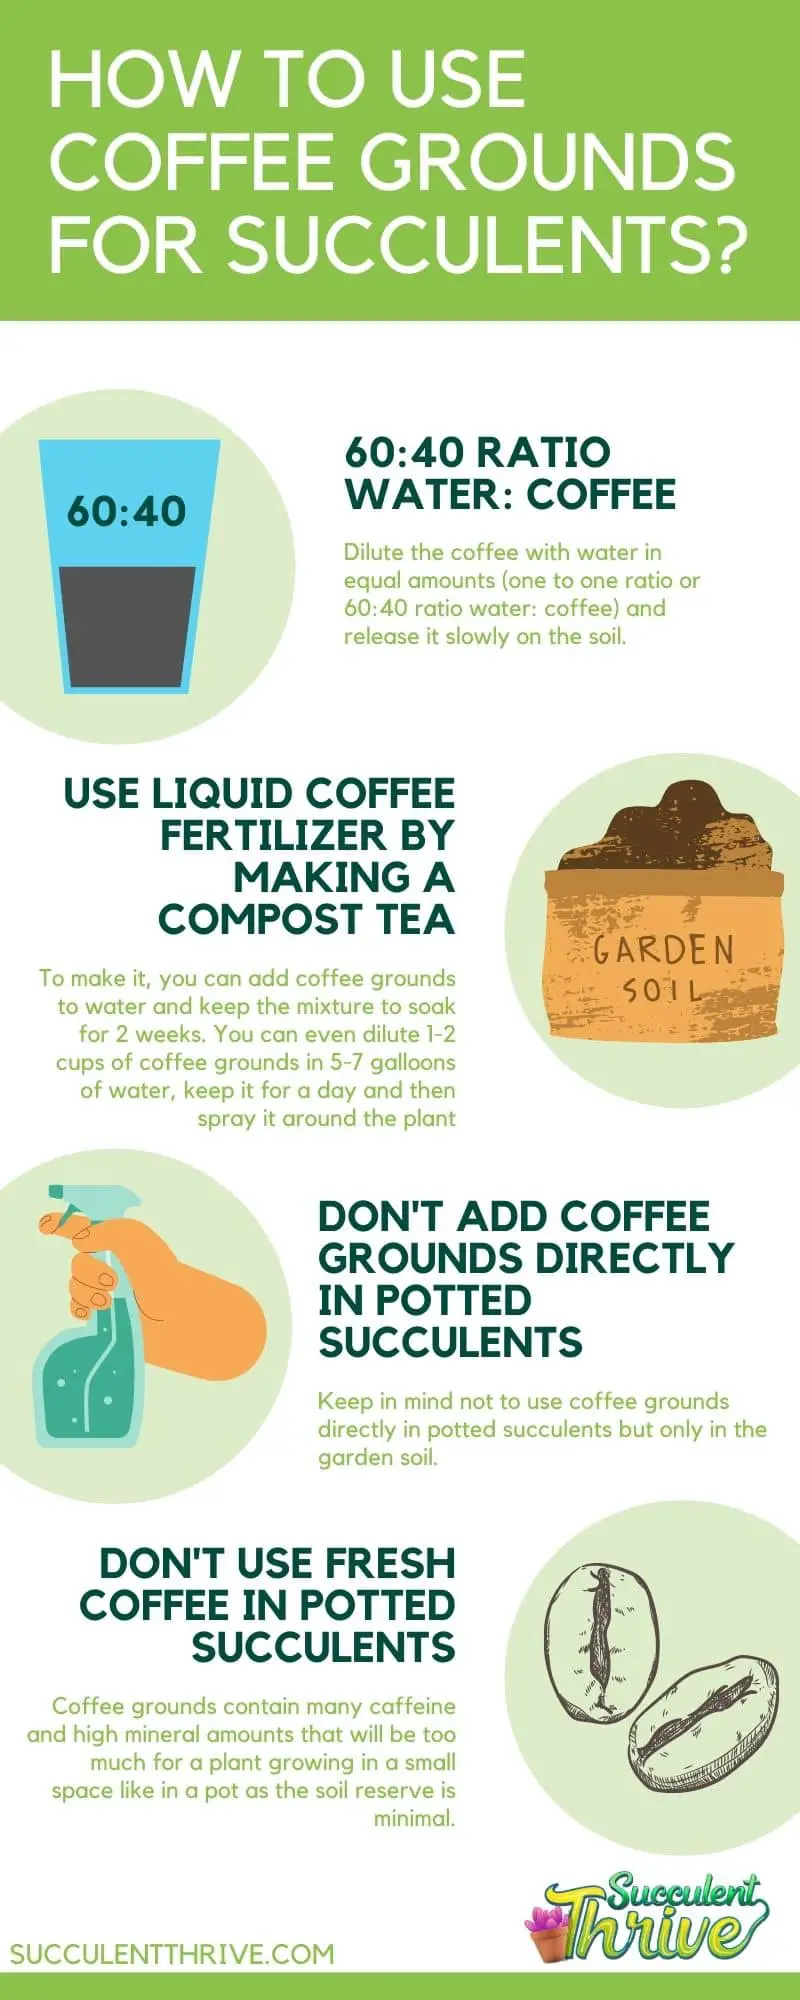 How to Use Coffee Grounds for Succulents Infographic